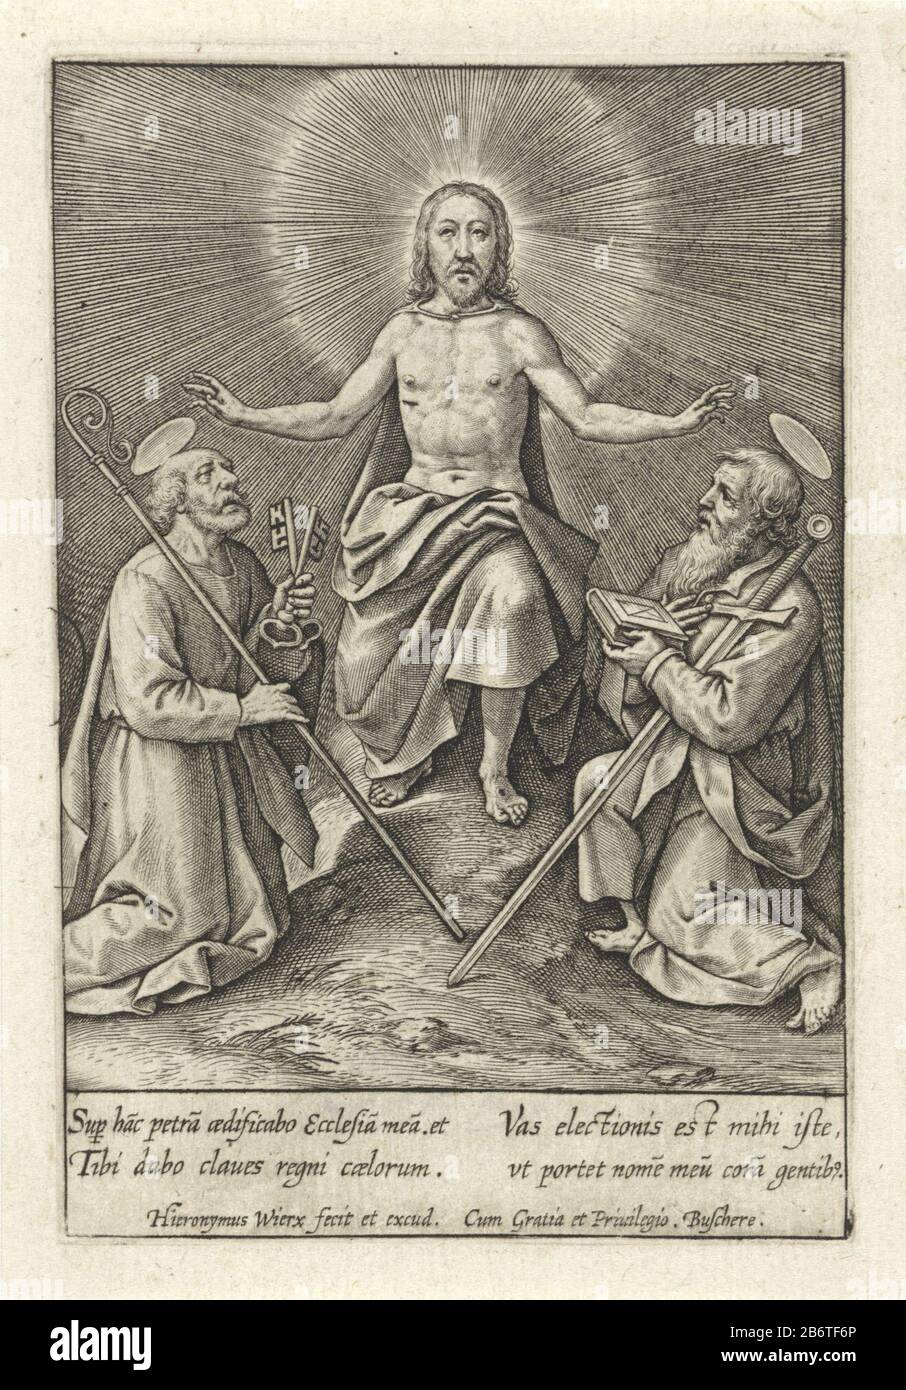 Herrezen Christus met Petrus en Paulus Peter and Paul kneel in adoration of the risen Christ. He blesses them, sitting on a hill. In the margin a four-line signature, in two columns, in Latijn. Manufacturer : printmaker: Jerome Who: rix (listed building) Publisher: Hieronymus Wierix (listed property) provider of privilege: Joachim de Buschere (listed property) Place Manufacture: Antwerp Date: 1563 - for 1619 Physical features: car material: paper Technique: engra (printing process) Dimensions: plate edge: h 96 mm × W 65 mm Subject: appearances of Christ after the Resurrectionthe apostle Paul o Stock Photo